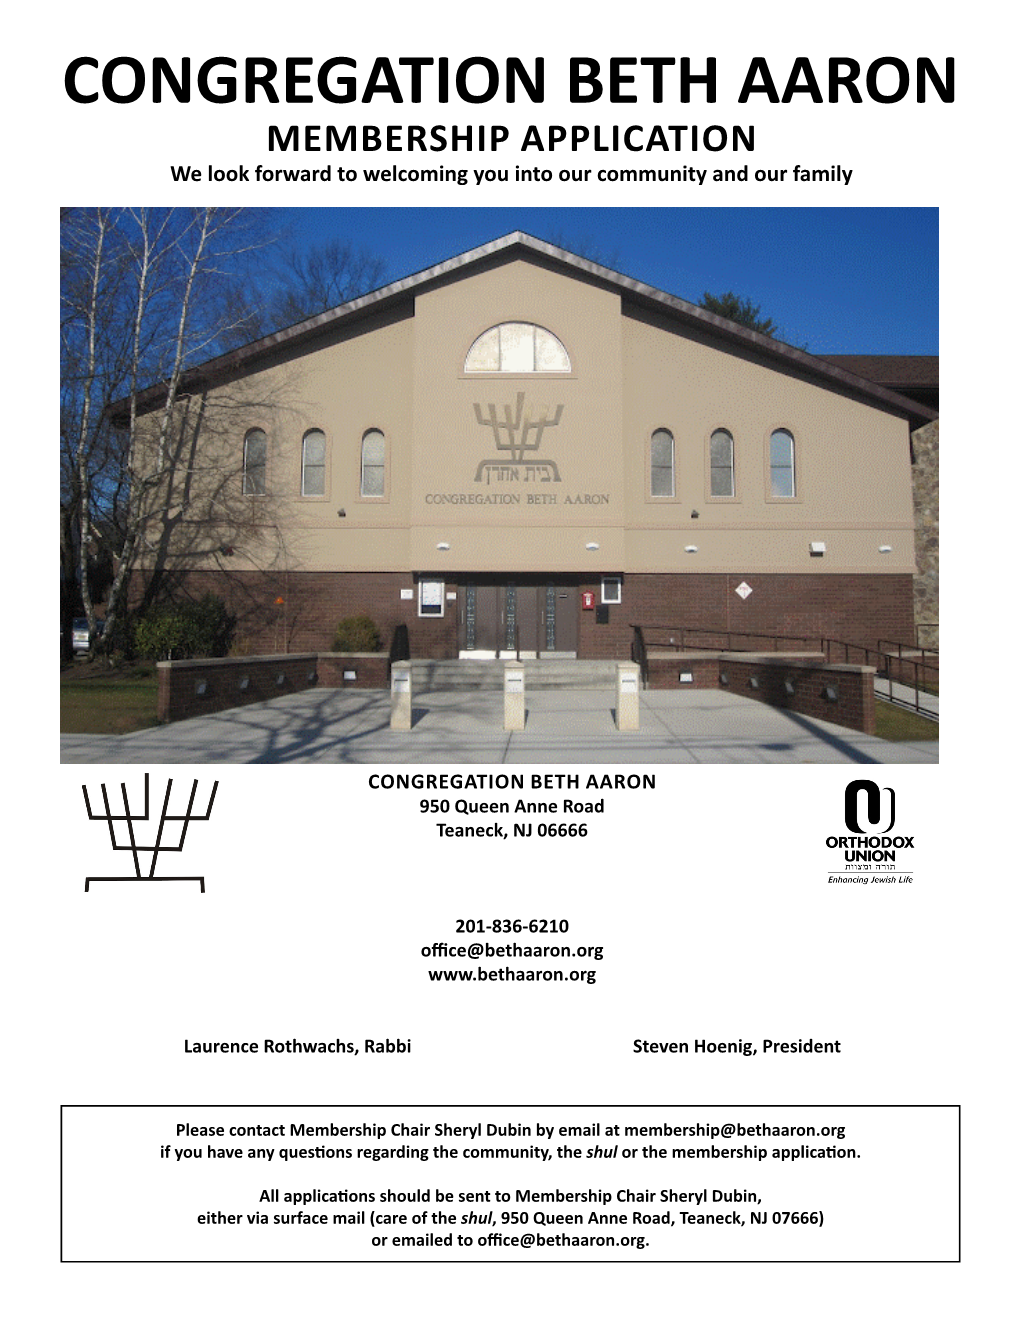 CONGREGATION BETH AARON Membership Application We Look Forward to Welcoming You Into Our Community and Our Family